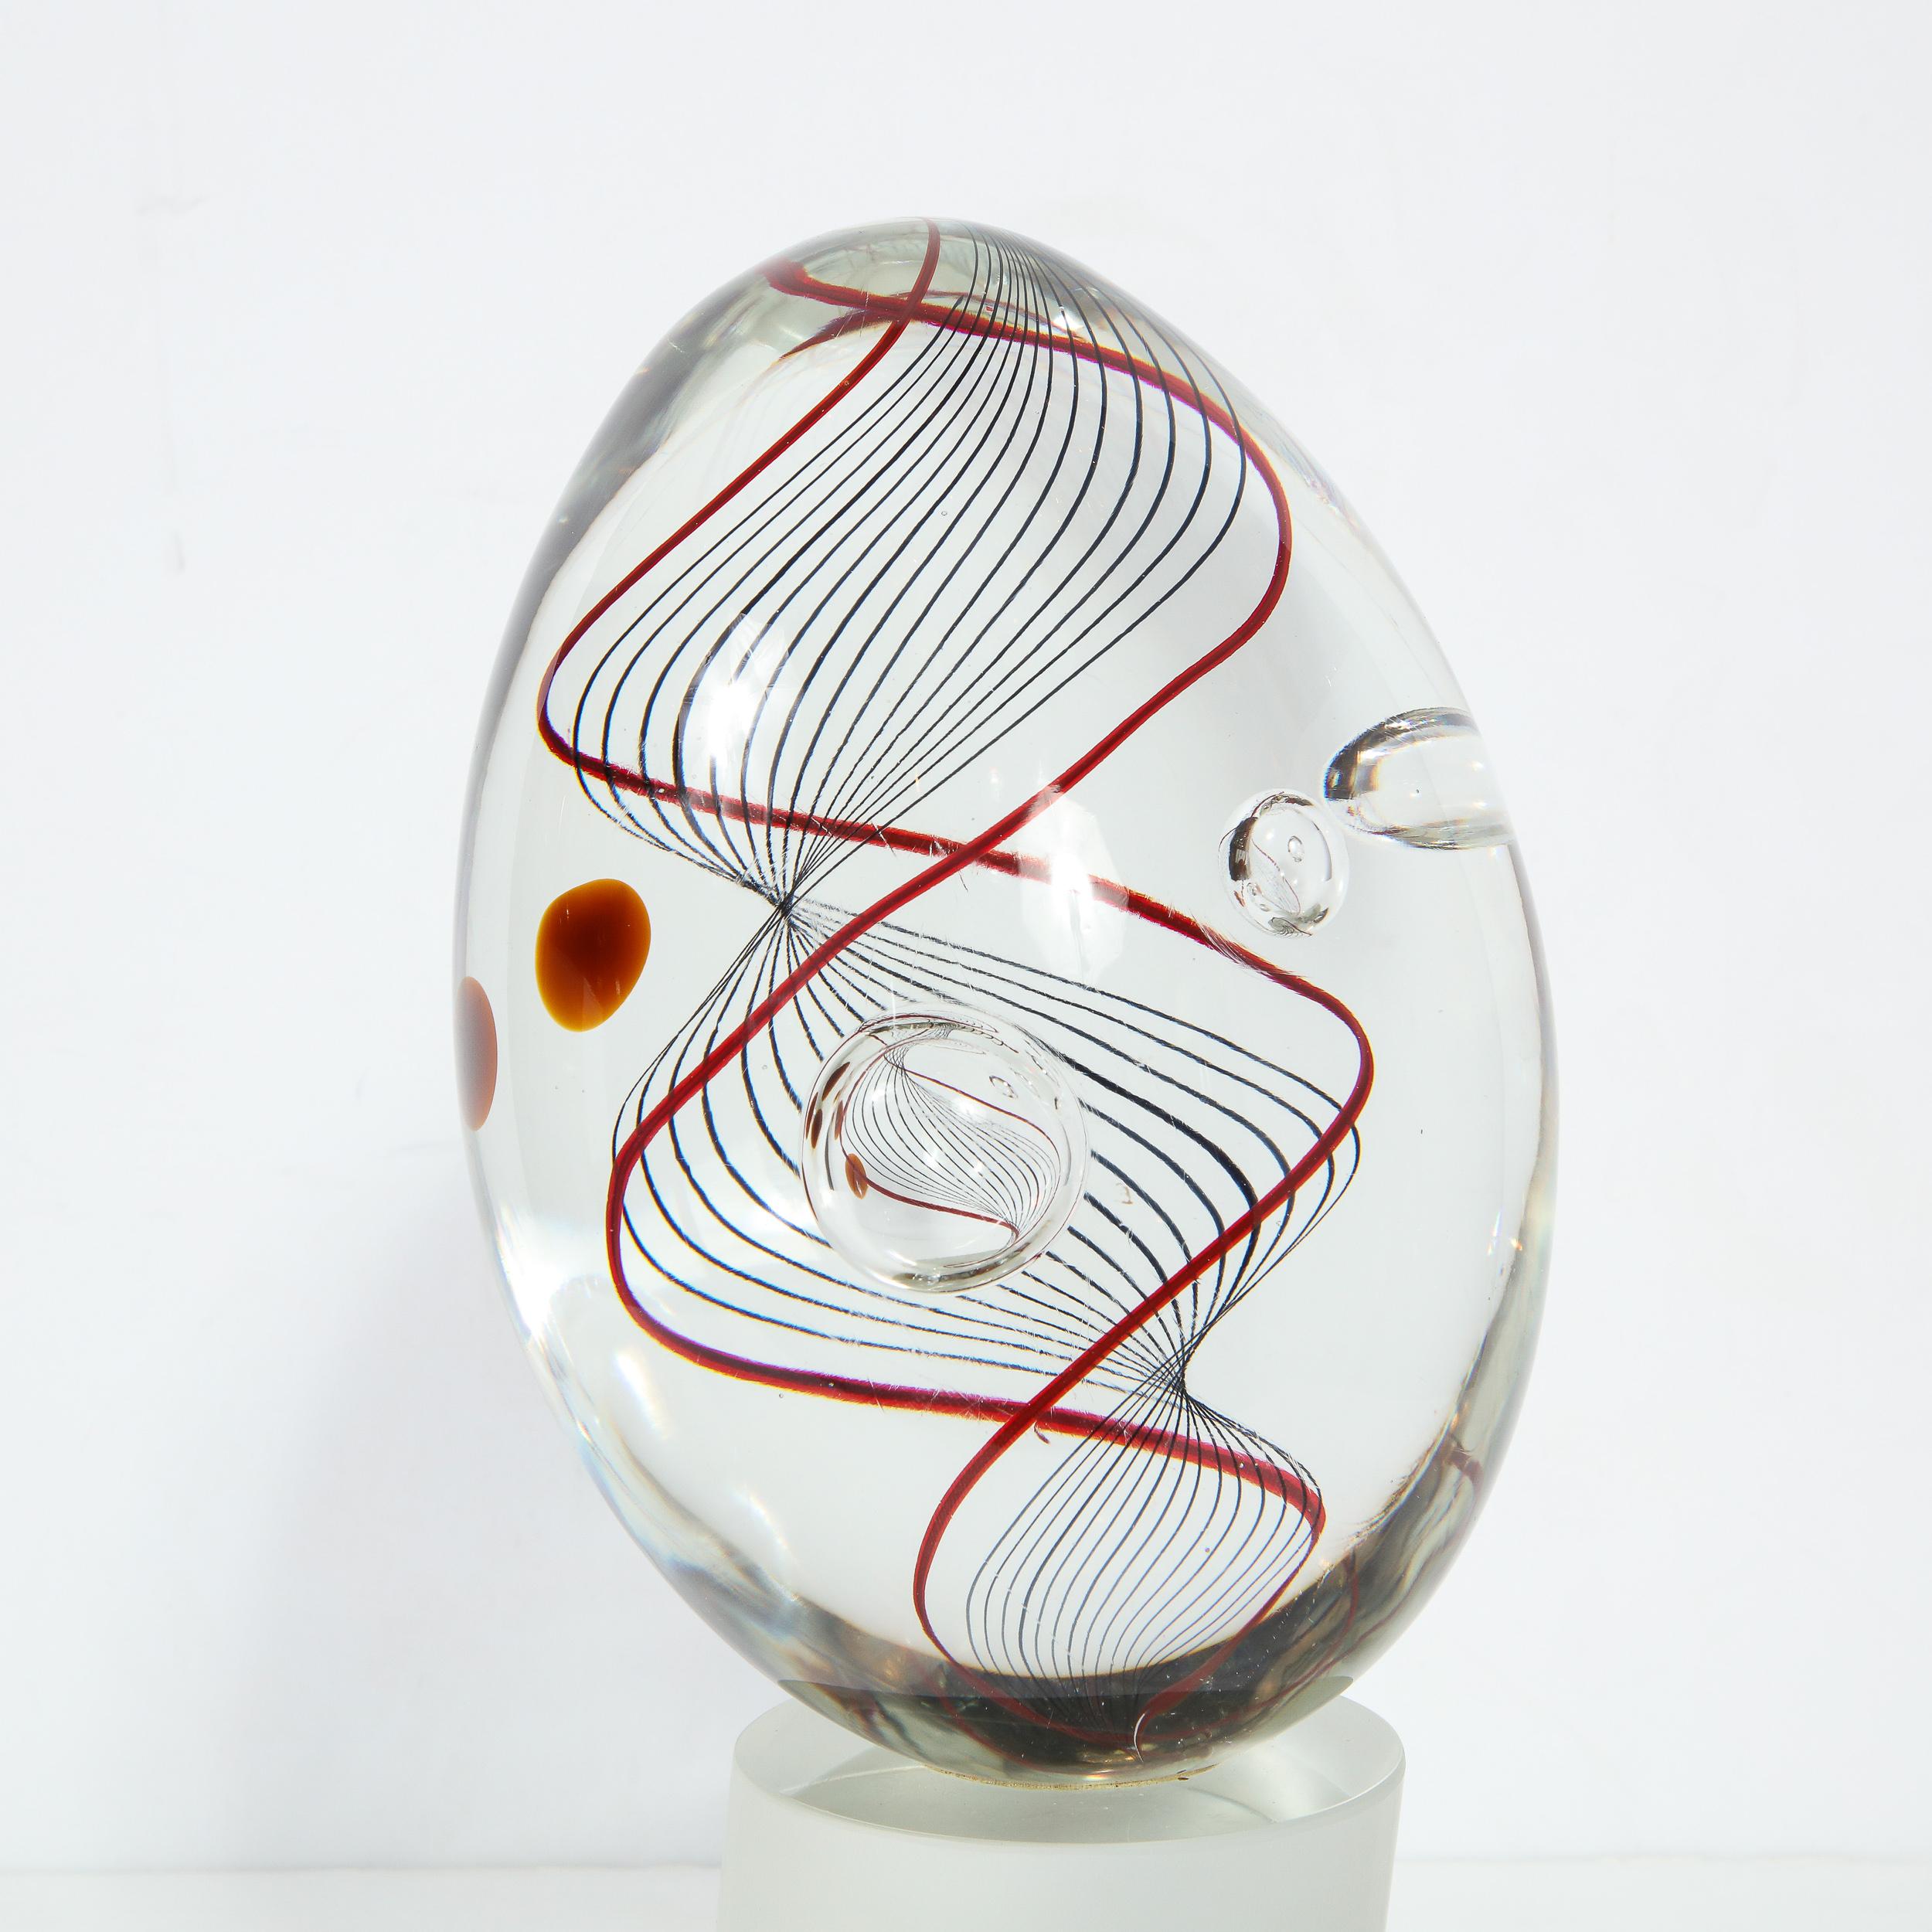 This stunning Mid-Century Modern glass sculpture was realized and signed by the illustrious atelier of Seguso, circa 1970. It features a volumetric cylindrical base leaning at a slight bias in frosted glass. An ovoid form with a spiraling helix-